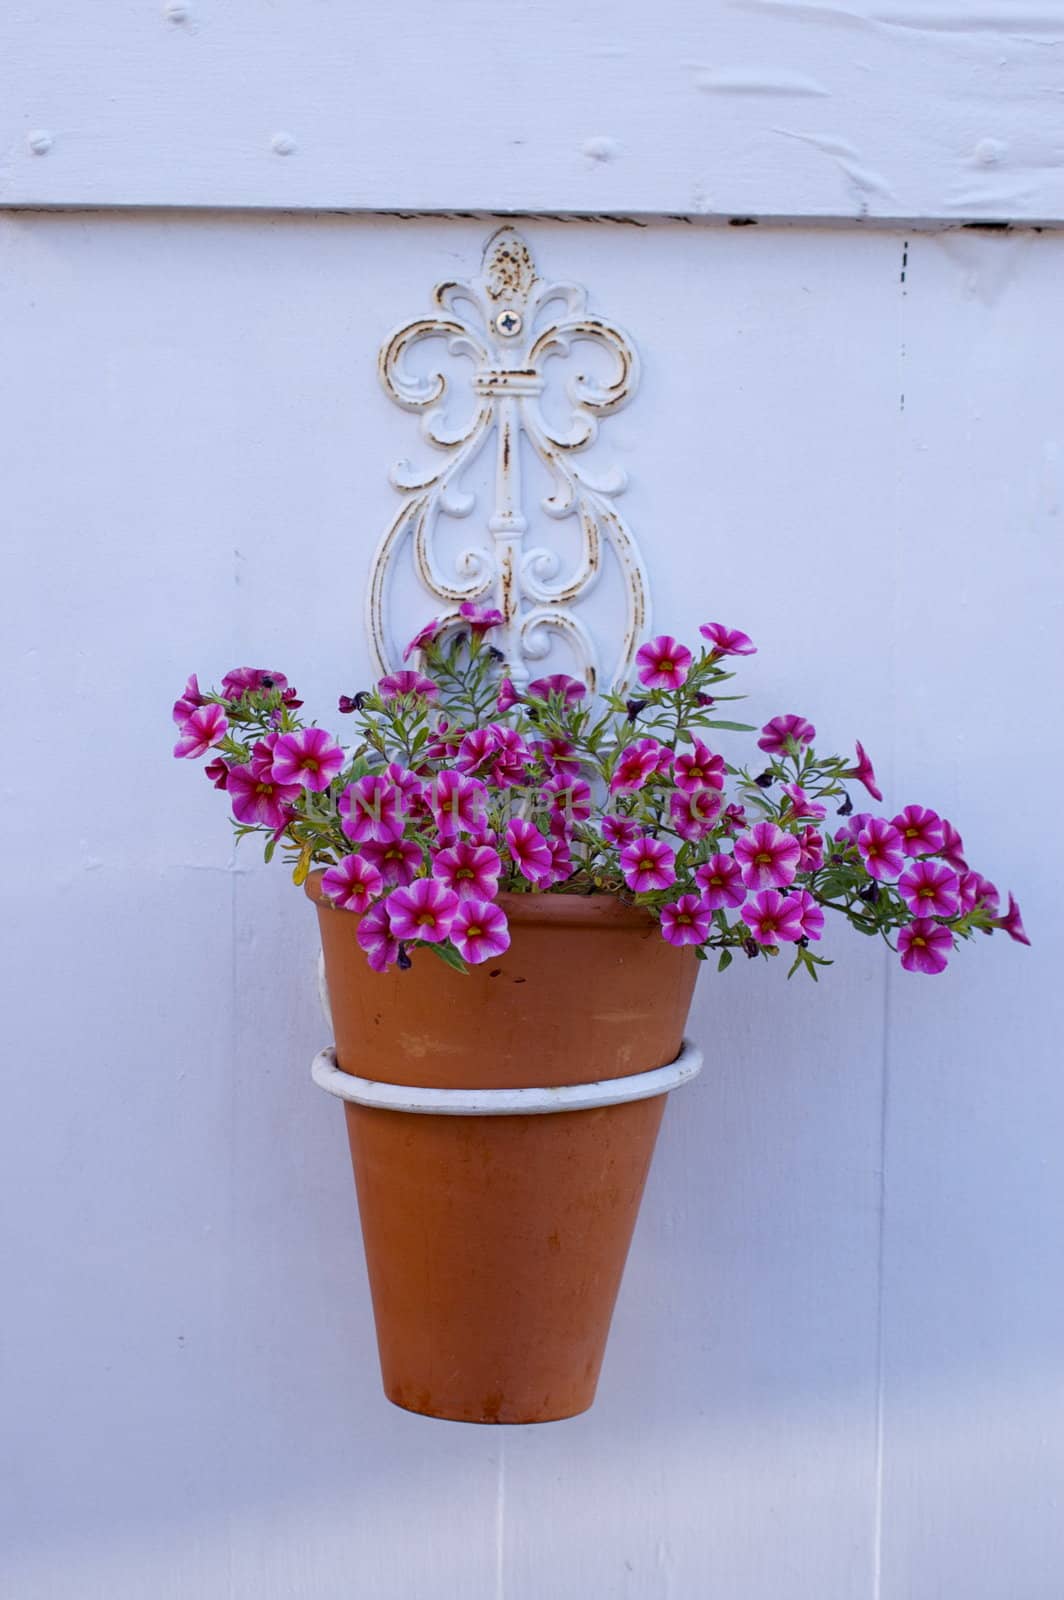 Delicate small deep pink flowers growing in a suspended terracotta pot against a white wooden background, with copy space.